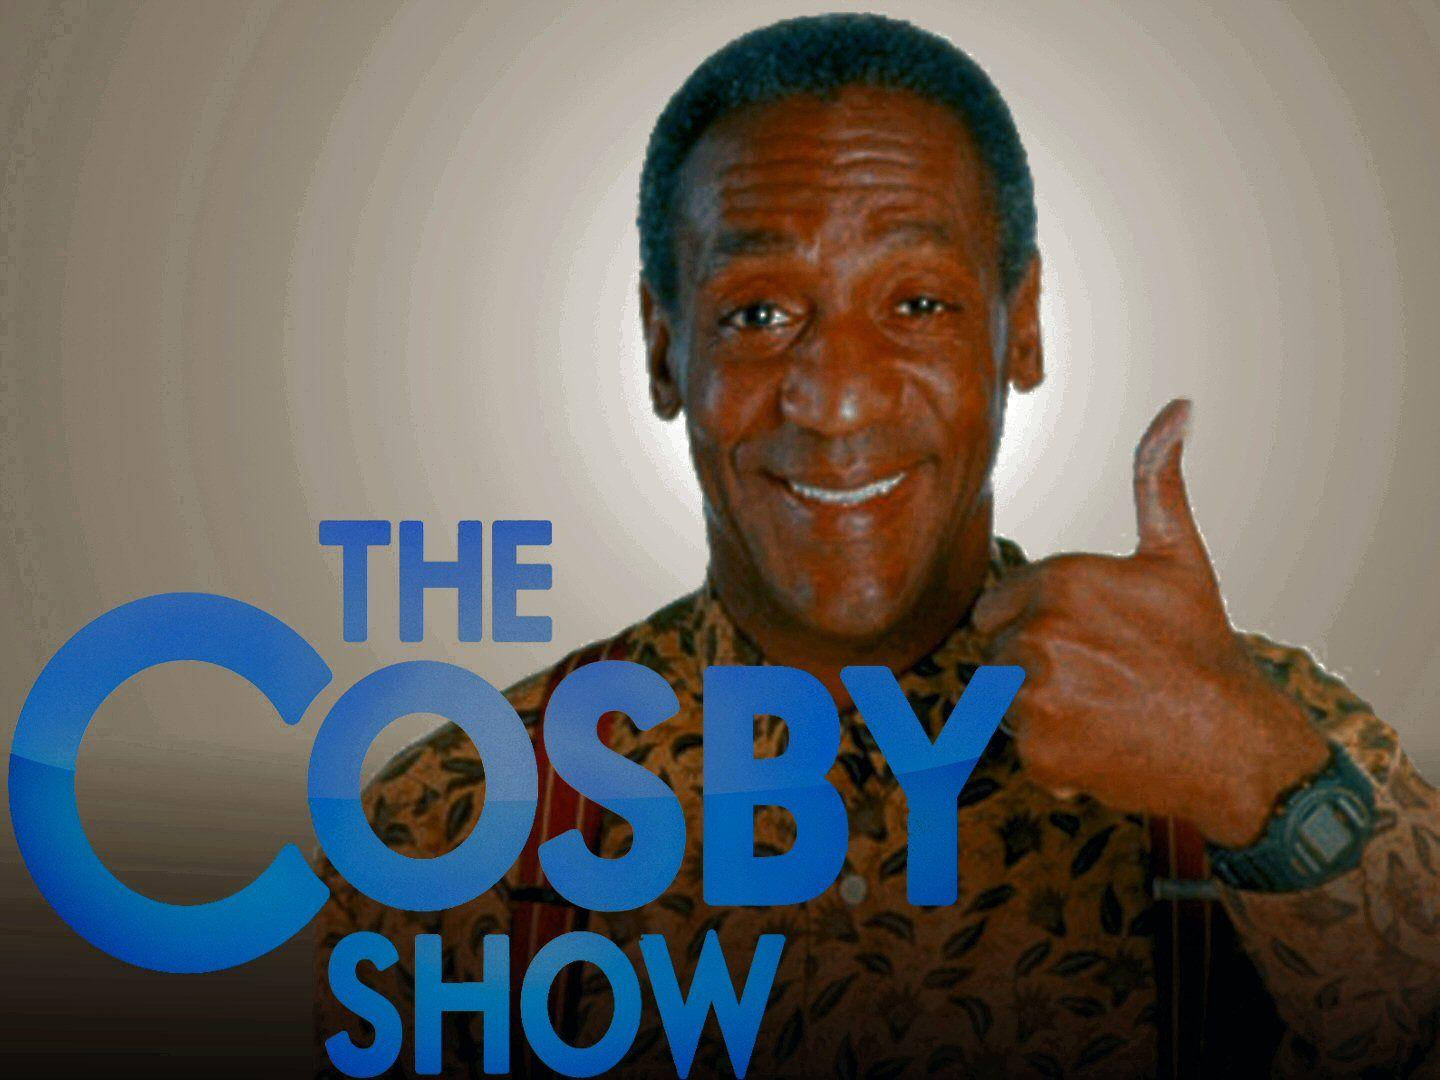 Bill Cosby In A Still From The Cosby Show